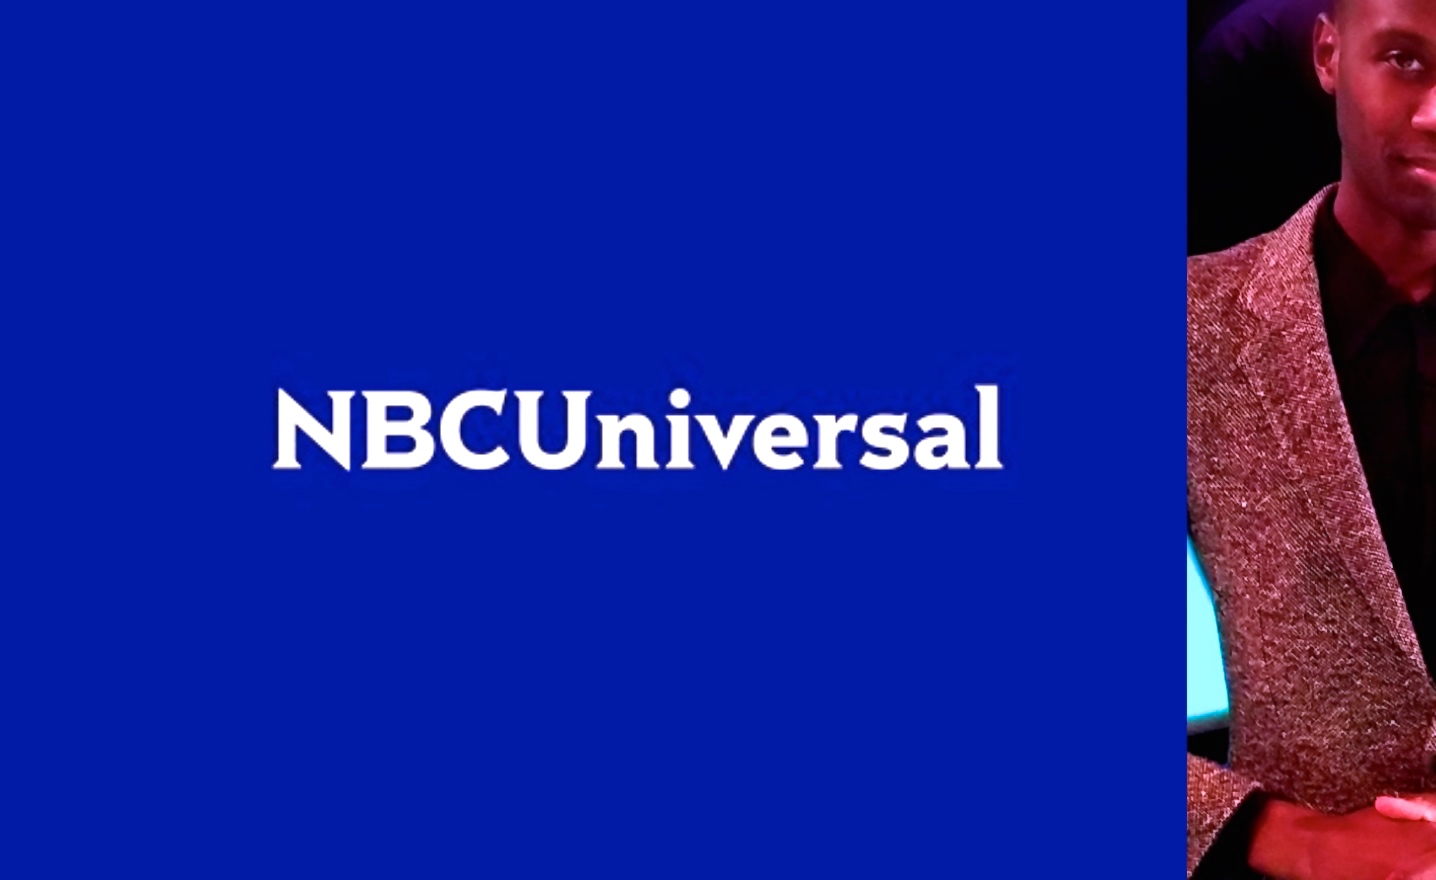 NBC BOOKS CHARLII ... ( #NBCUniversal @charliiTV / #charliiTV @NBCUniversal ) ... airing from September 14th. http://www.linkedin.com/pulse/nbc-books-charlii-charlii-com-?trk=mp-reader-card